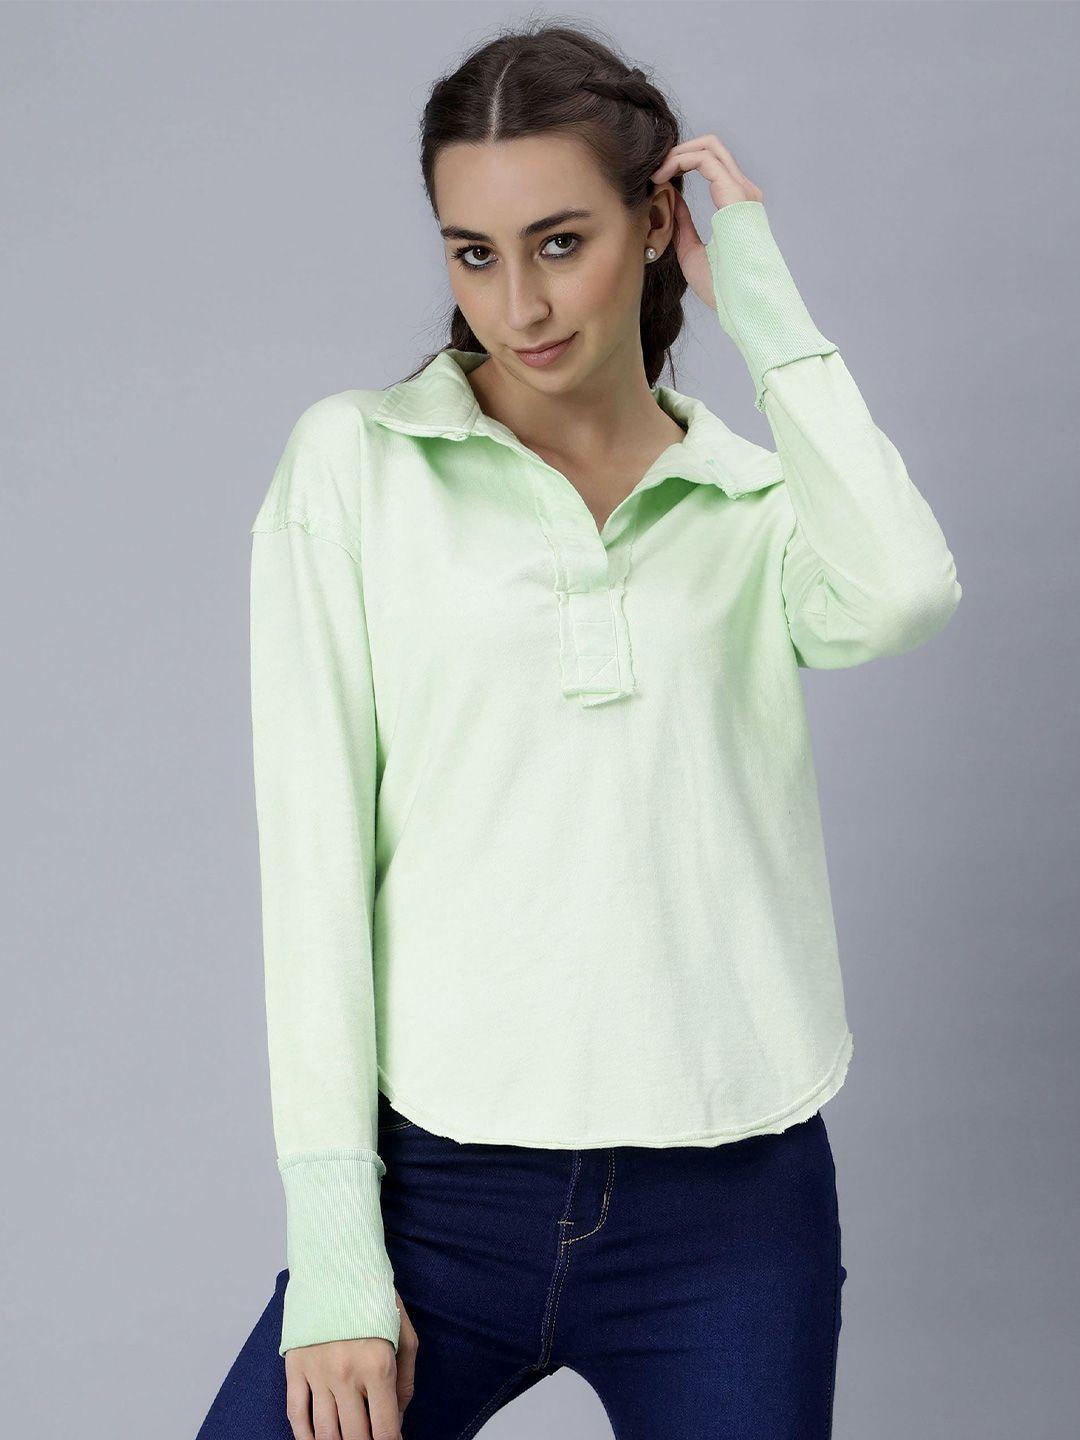 pritla knitted half placket spread collar cotton casual shirt